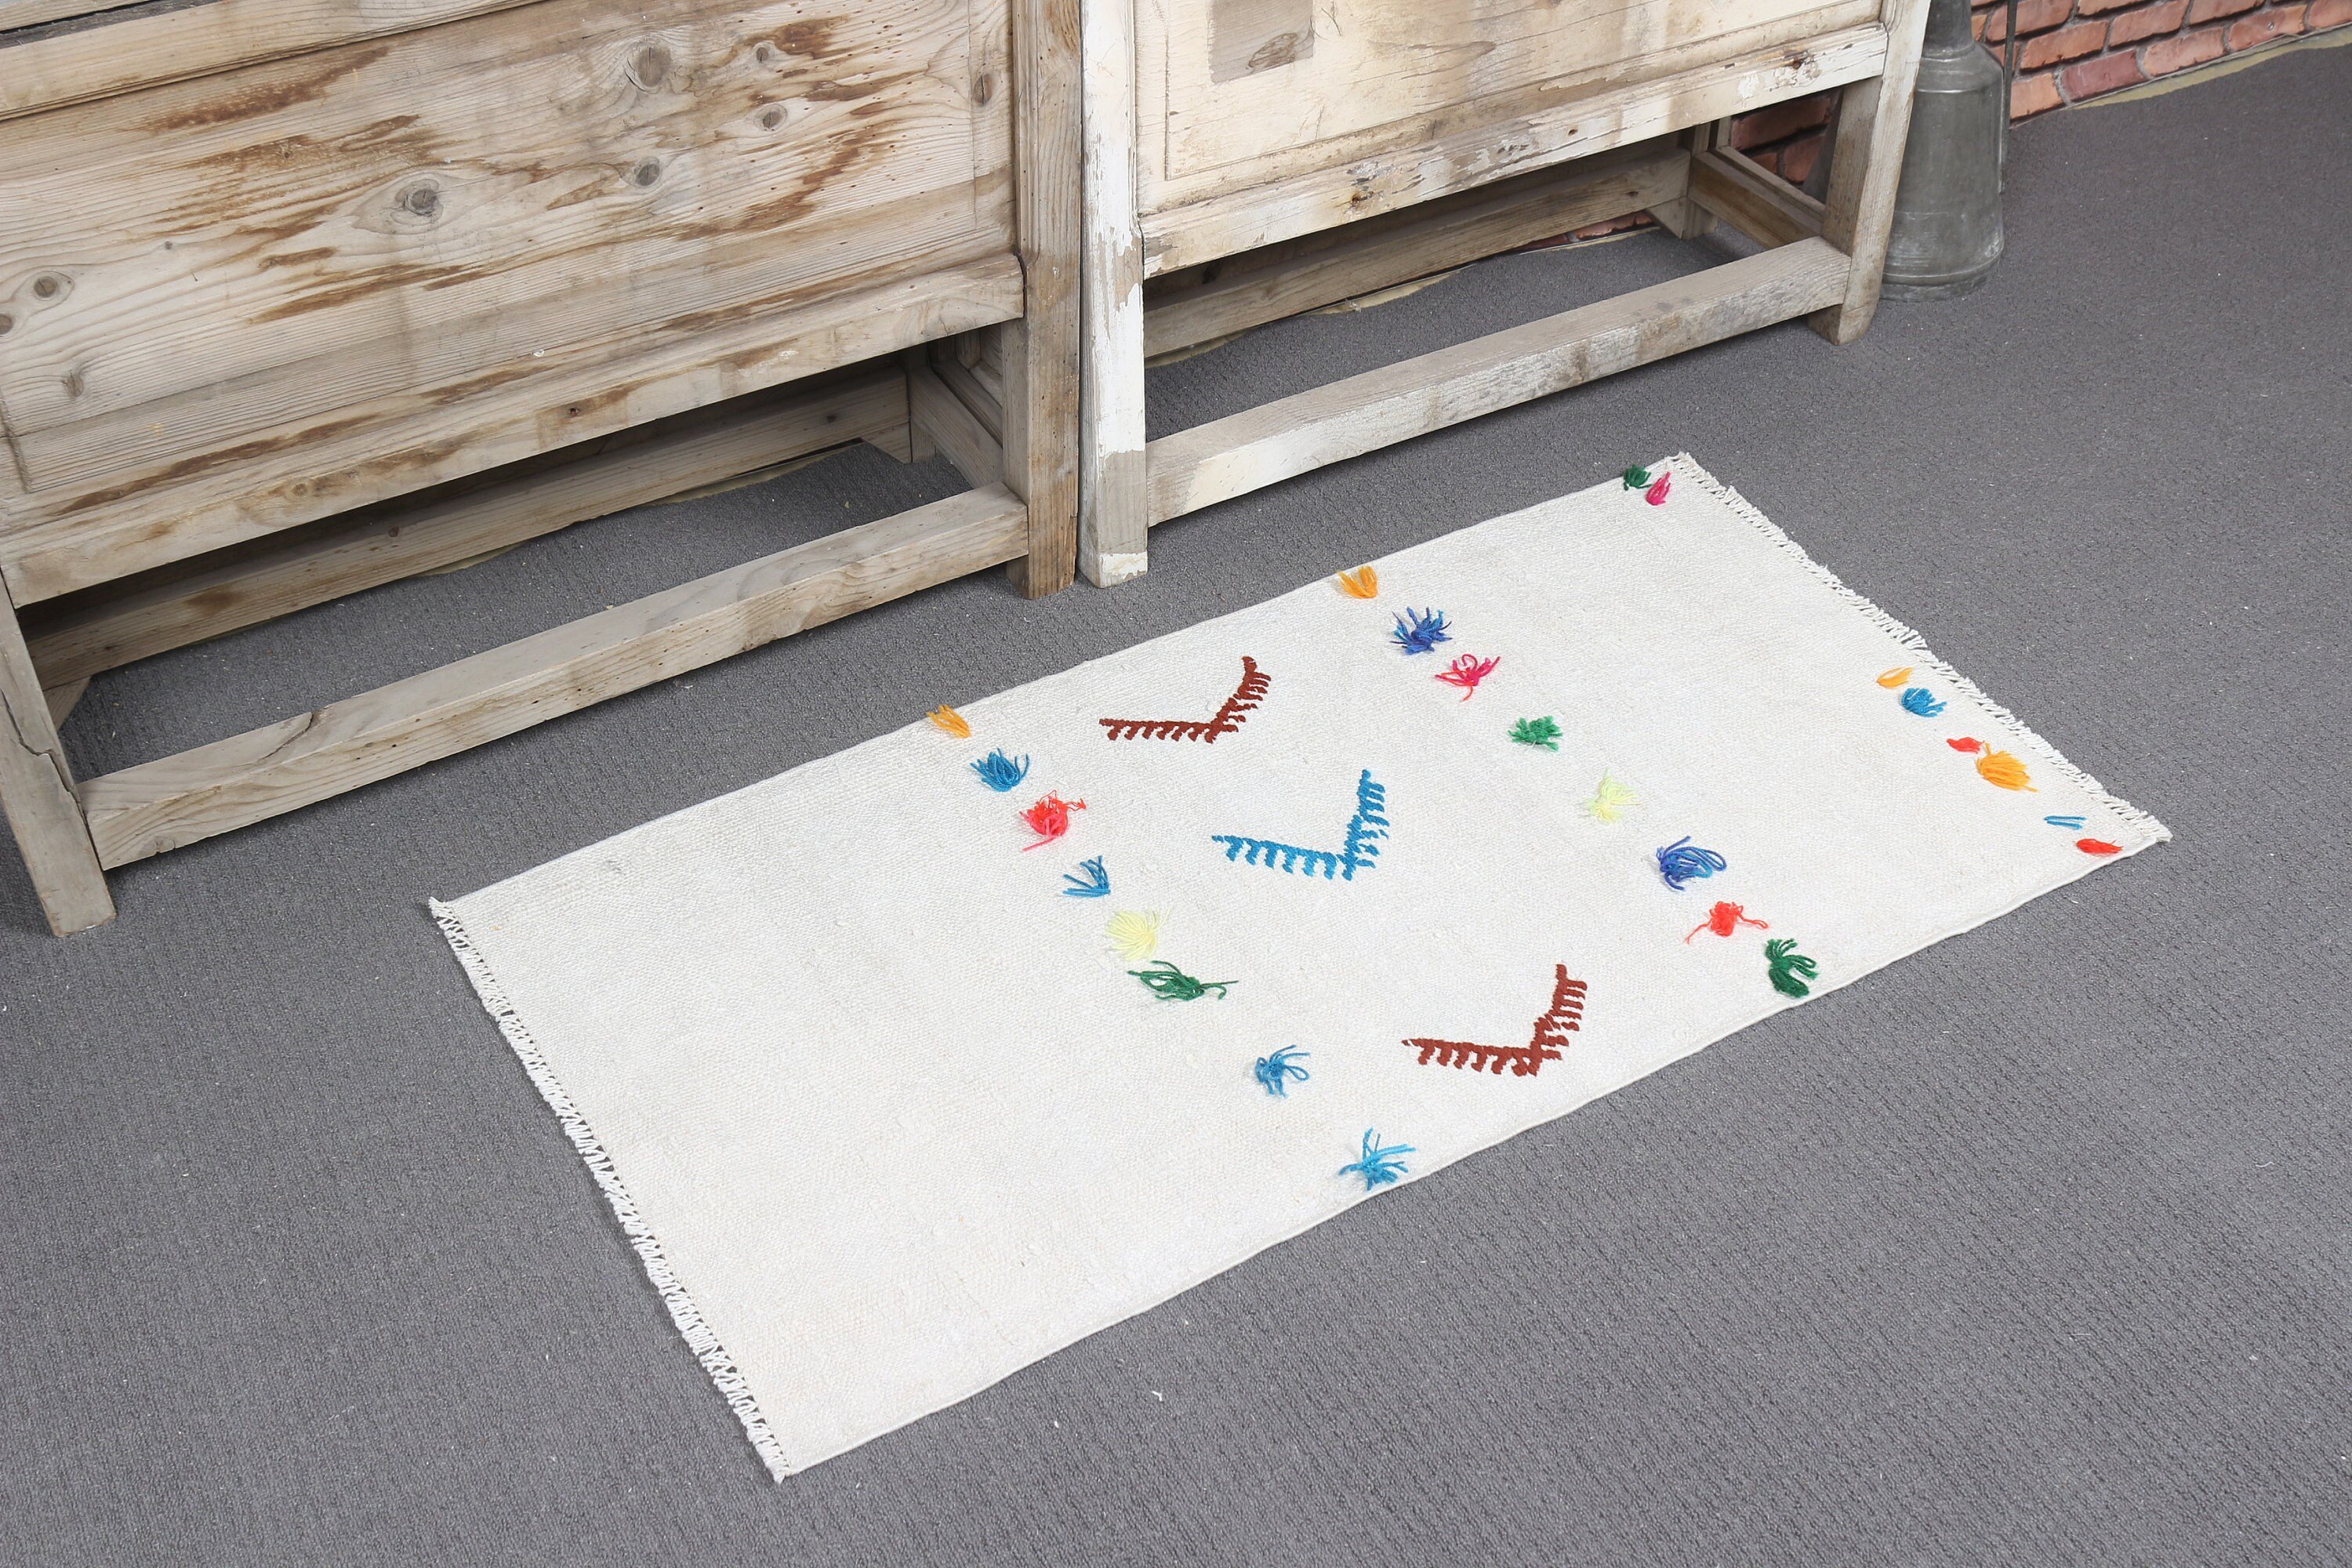 Entry Rugs, Turkish Rug, Kitchen Rug, Nomadic Rug, Home Decor Rug, Vintage Rugs, White  1.8x3.4 ft Small Rugs